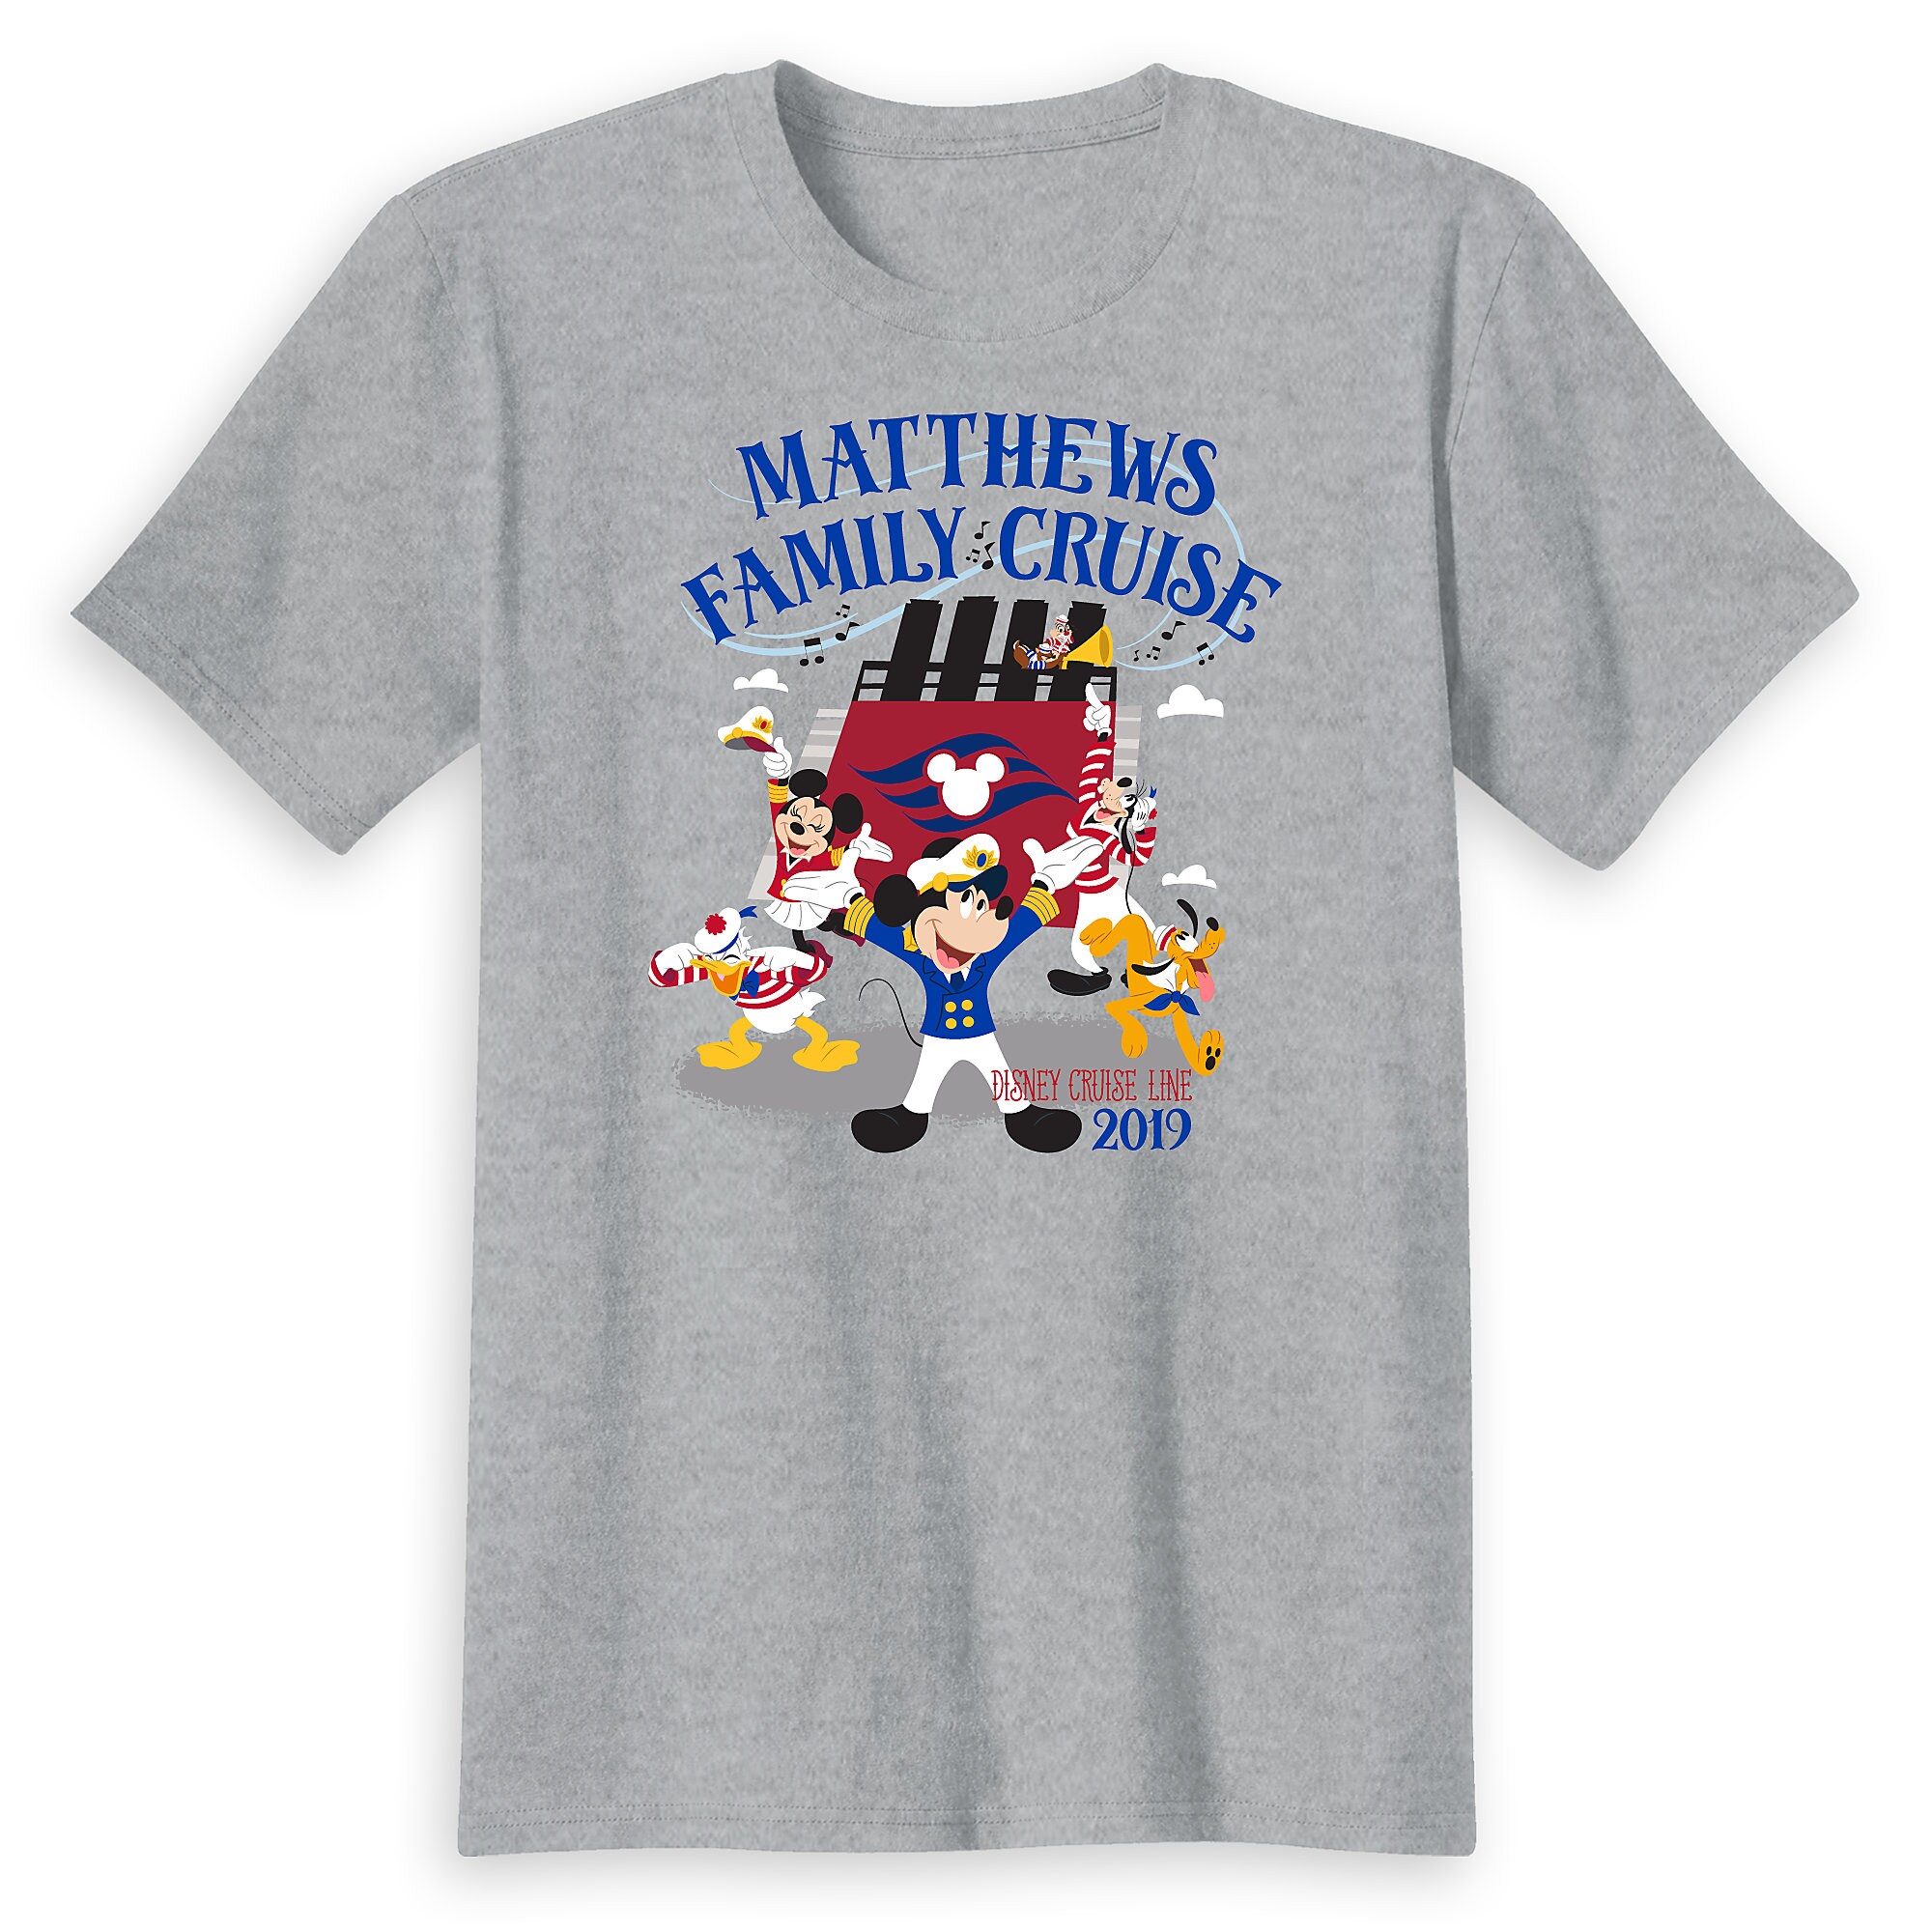 Adults' Captain Mickey Mouse and Crew Disney Cruise Line Family Cruise 2019 T-Shirt - Customized